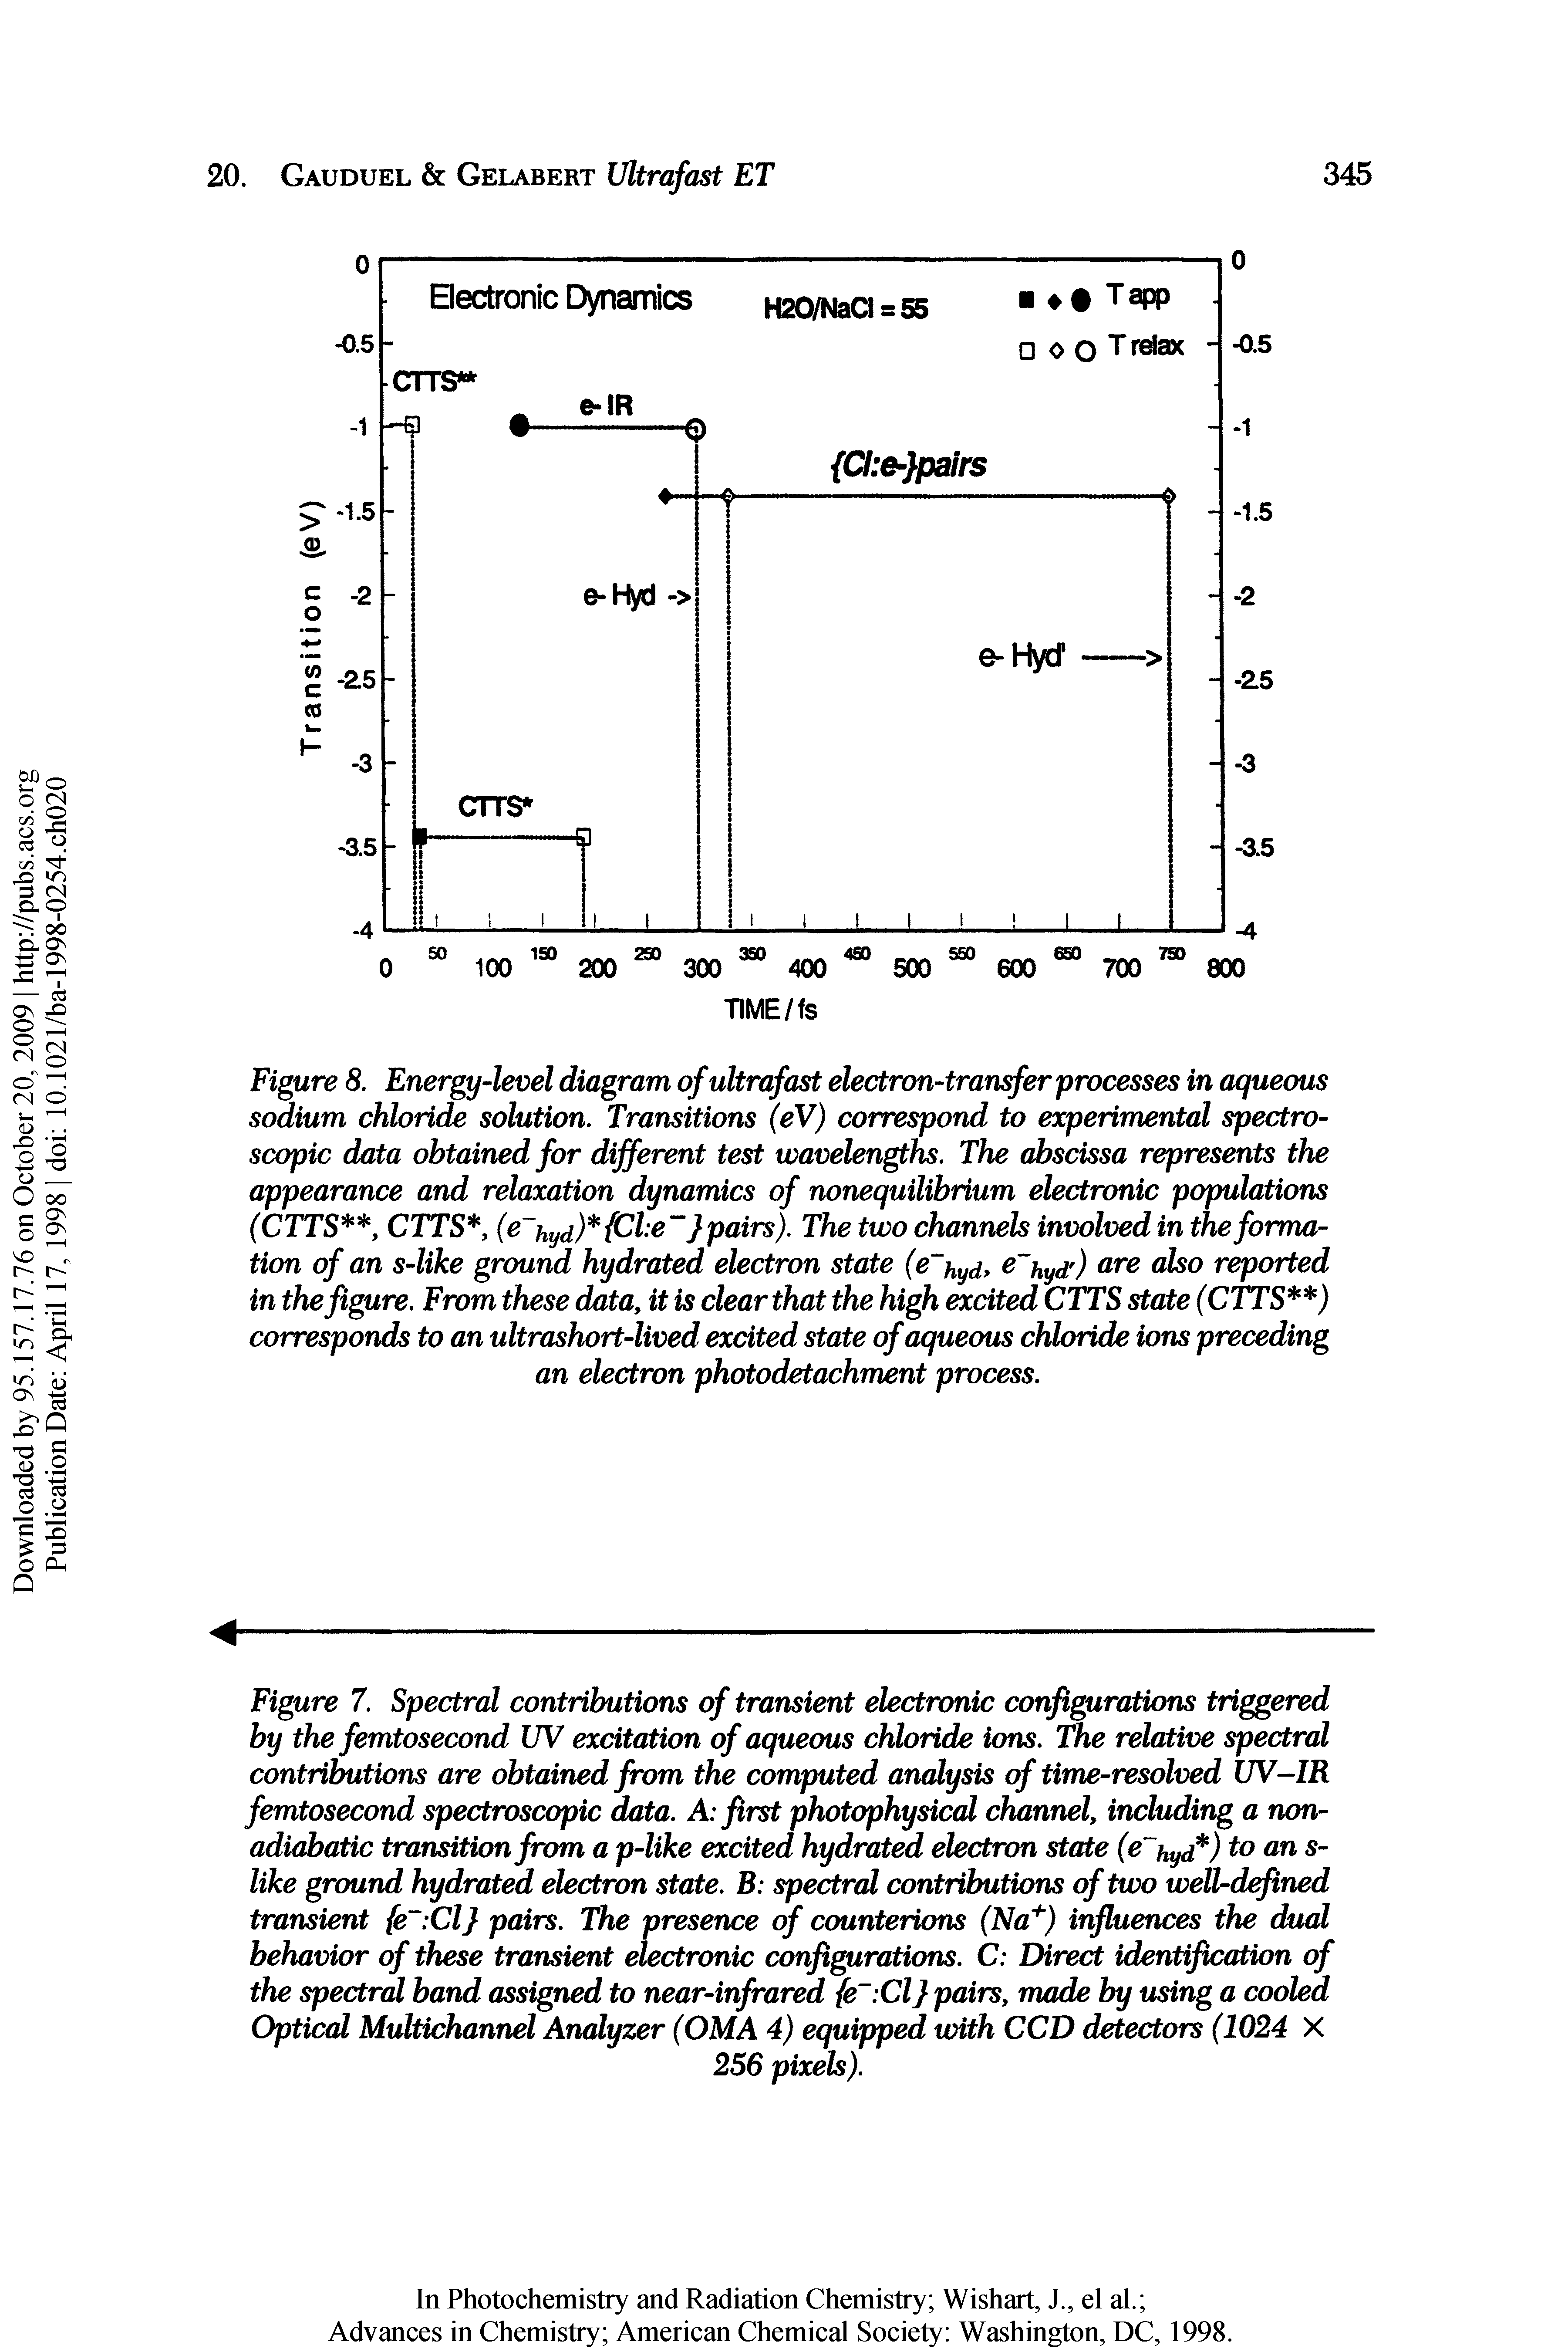 Figure 8. Energy-level diagram of ultrafast electron-transfer processes in aqueous sodium chloride solution. Transitions (eV) correspond to experimental spectroscopic data obtained for different test wavelengths. The abscissa represents the appearance and relaxation dynamics of nonequilibrium electronic populations (CTTS ", CTTS, (e hyd) fCl e pairs). The two channels involved in the formation of an s-like ground hydrated electron state (e hyd, c hyd ) (dso reported in the figure. From these data, it is clear that the high excited CTTS state (CTTS ) corresponds to an ultrashort-lived excited state of aqueous chloride ions preceding an electron photodetachment process.